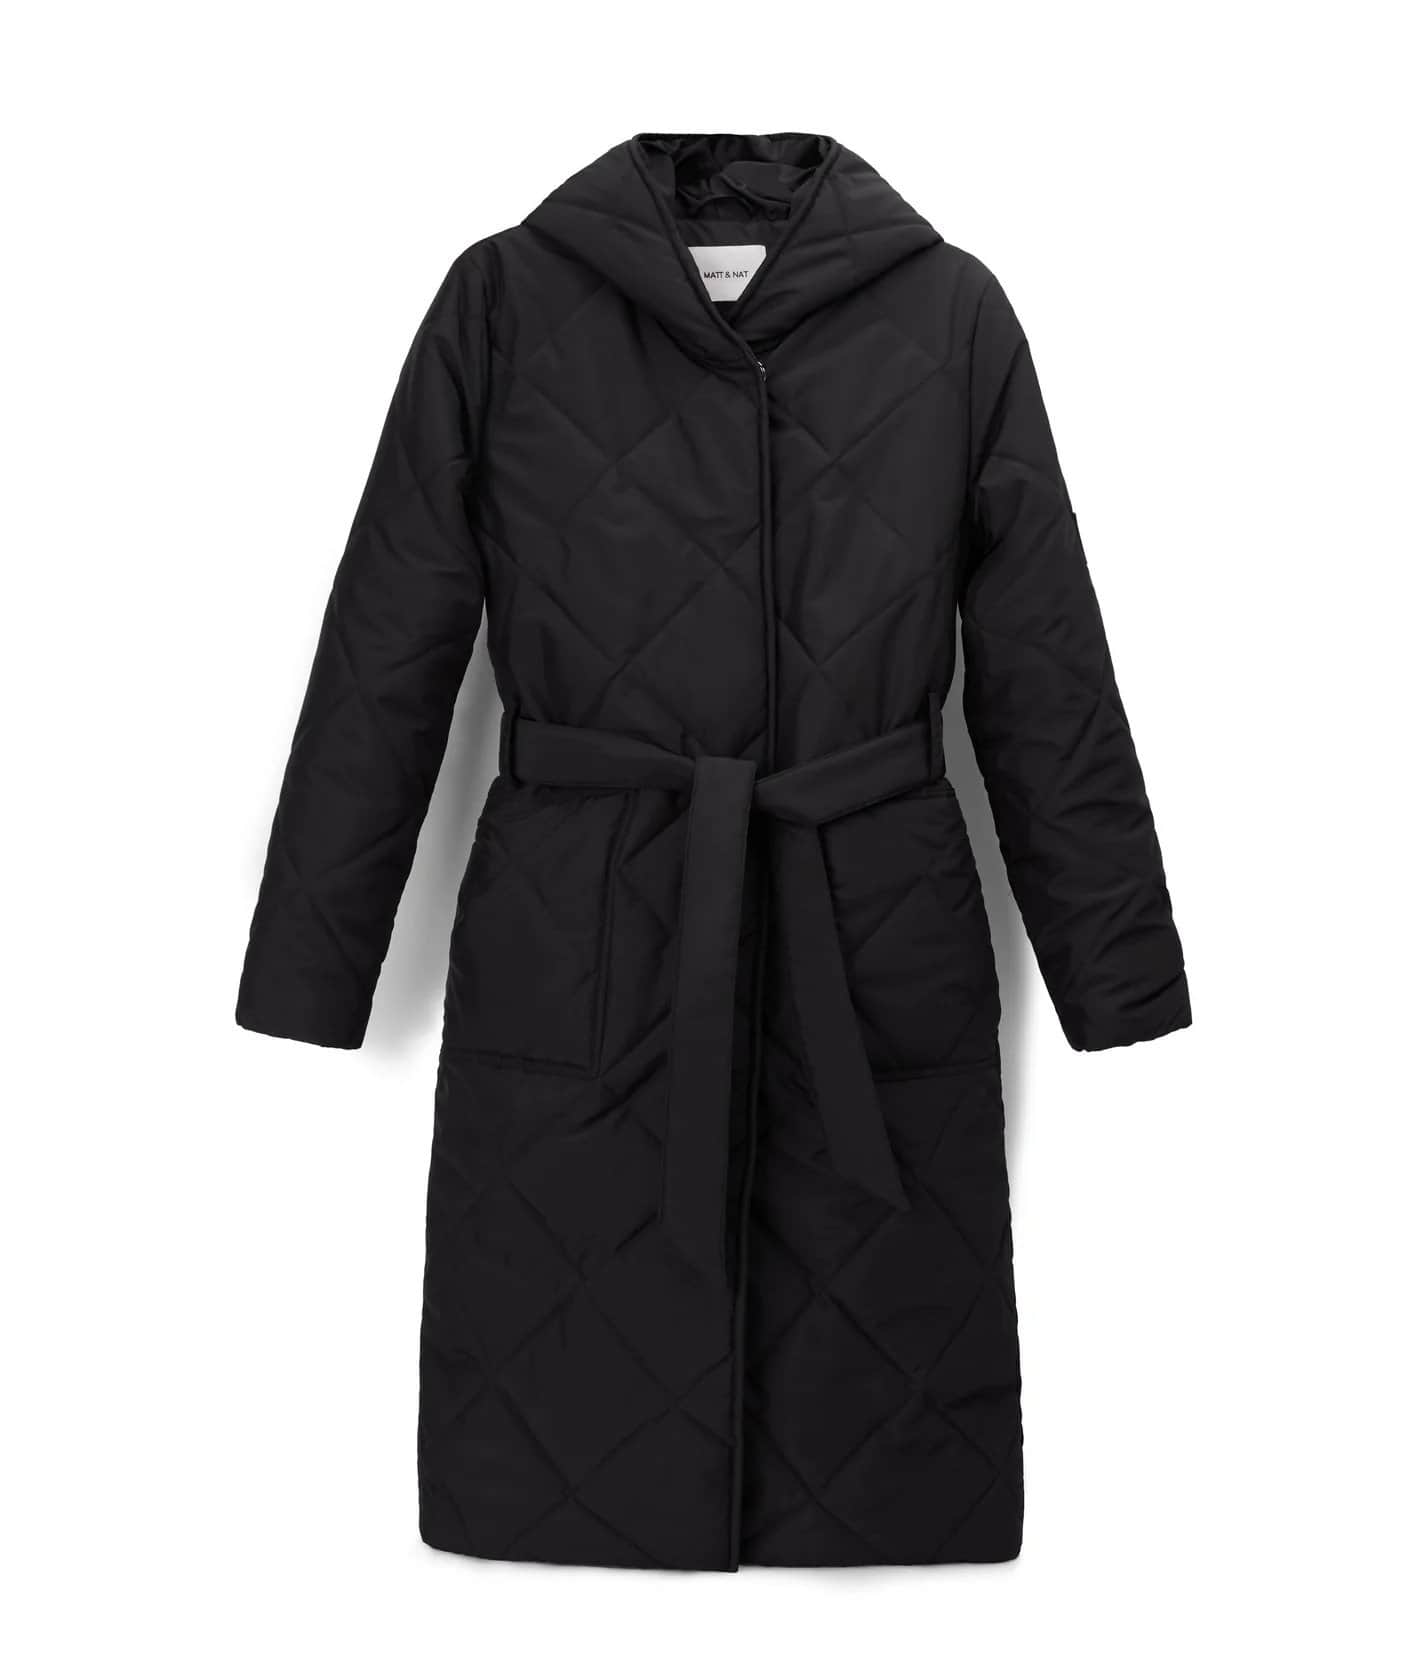 Black quilted puffer jacket with black belt from Matt and Nat